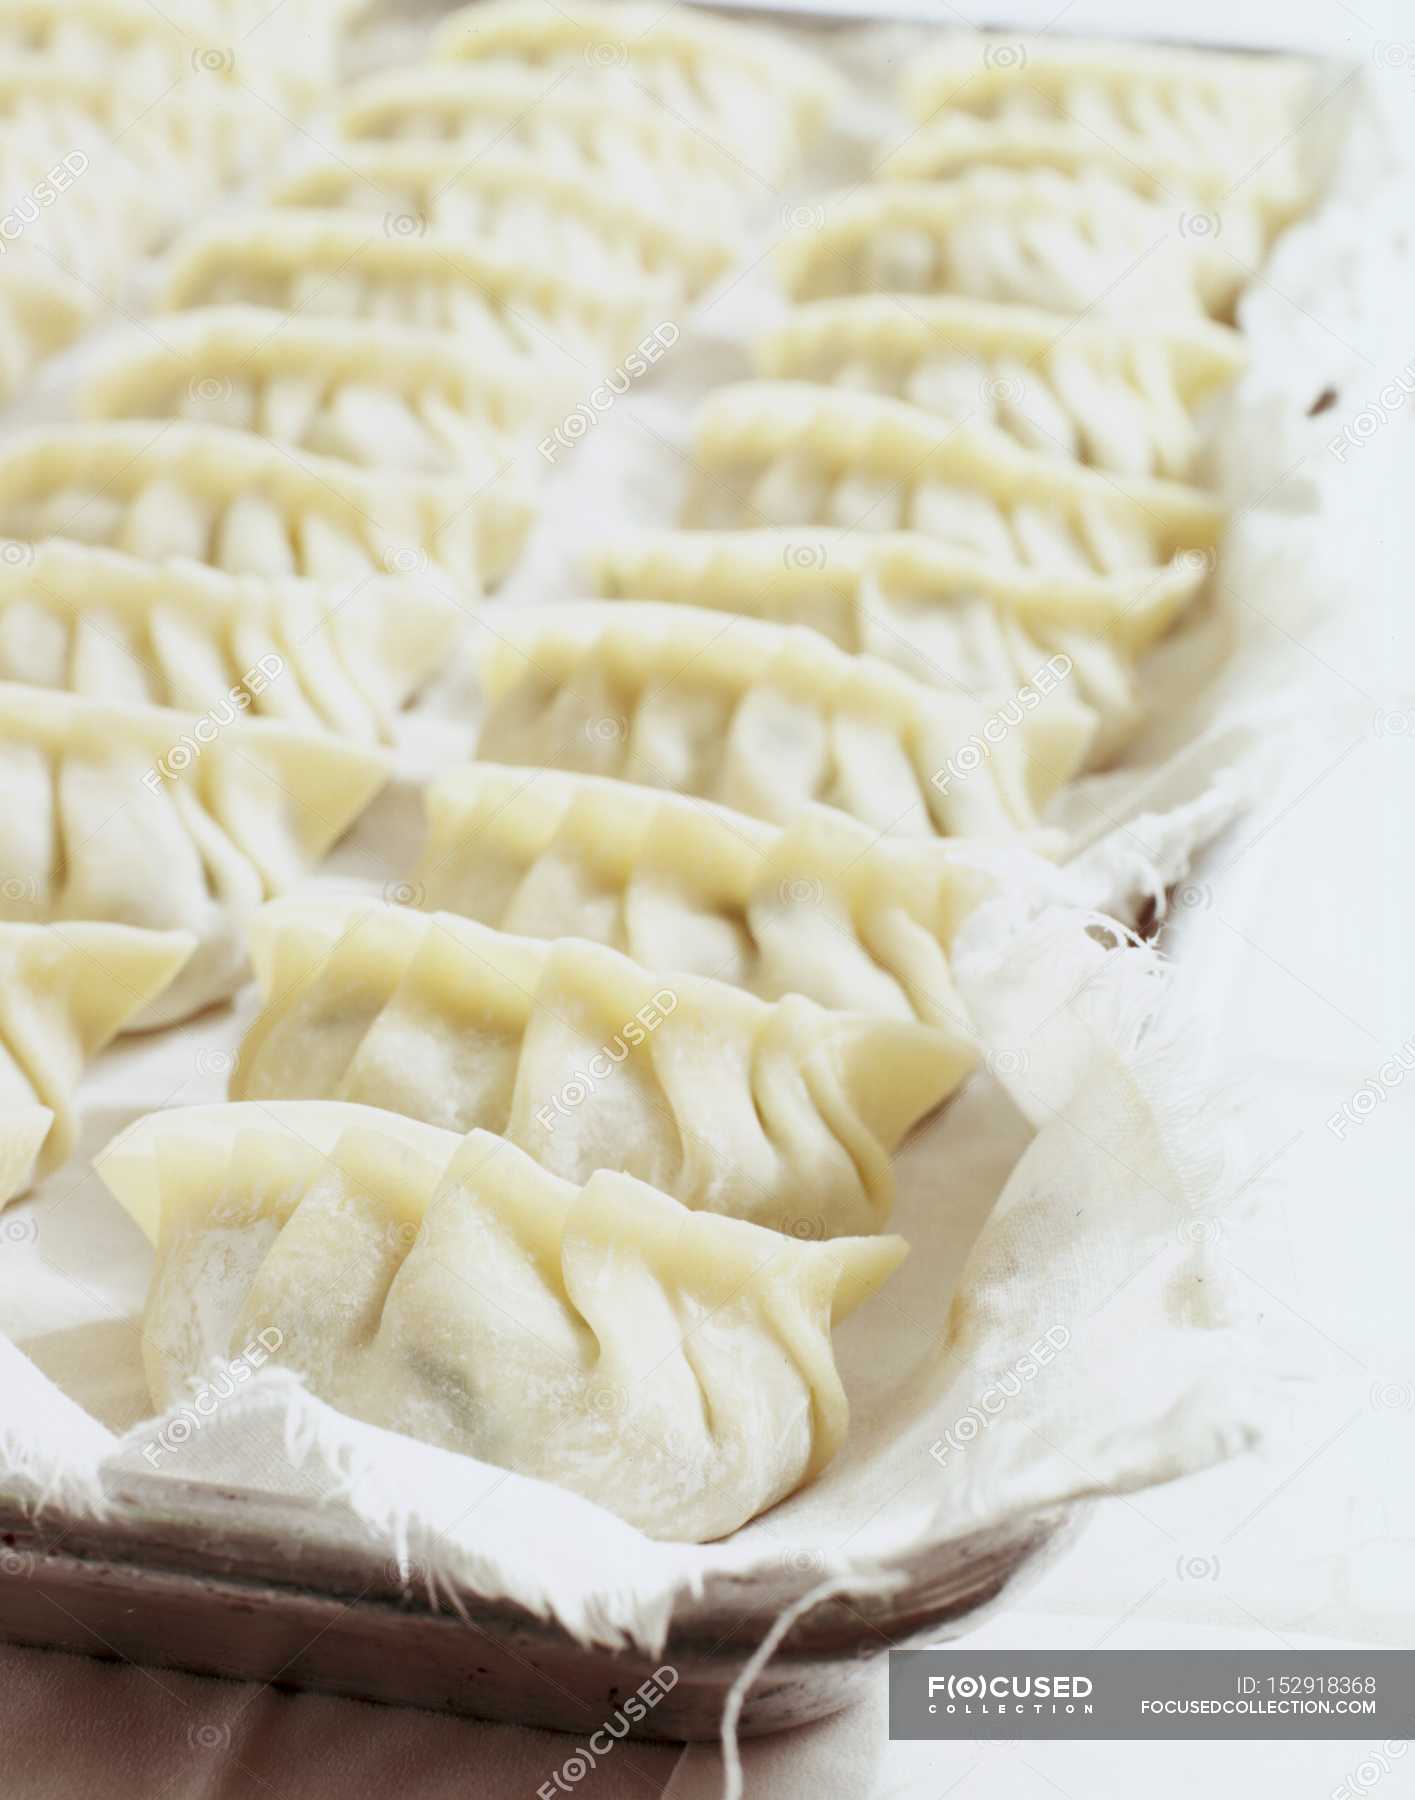 Raw pasta parcels — Ready To Eat, staple food - Stock Photo | #152918368